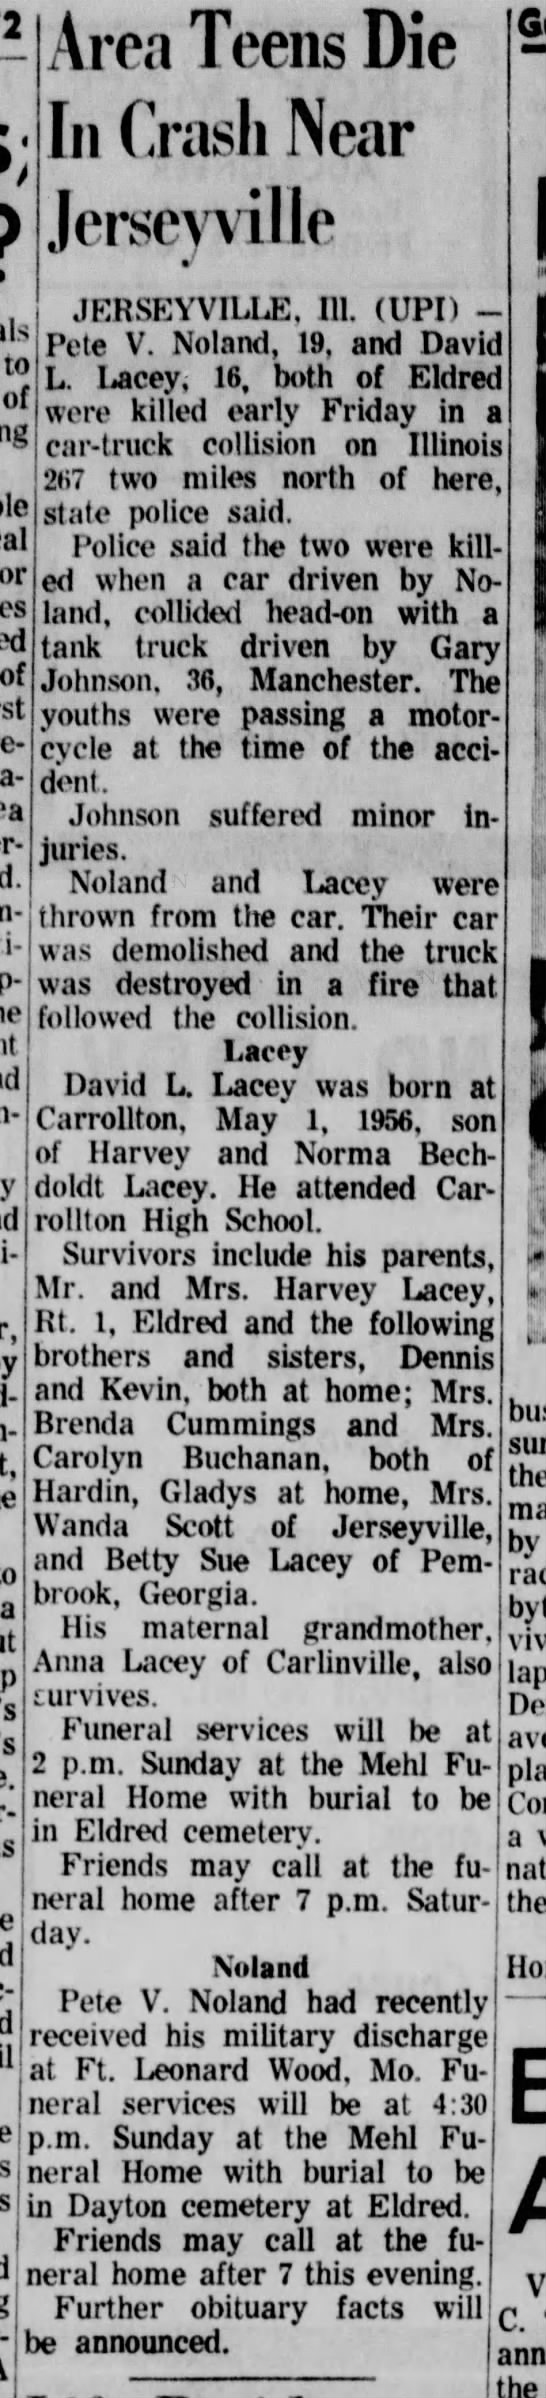 JERSEYVILLE,IL. DAVID L. LACEY KILLED AGE 16 - Newspapers.com